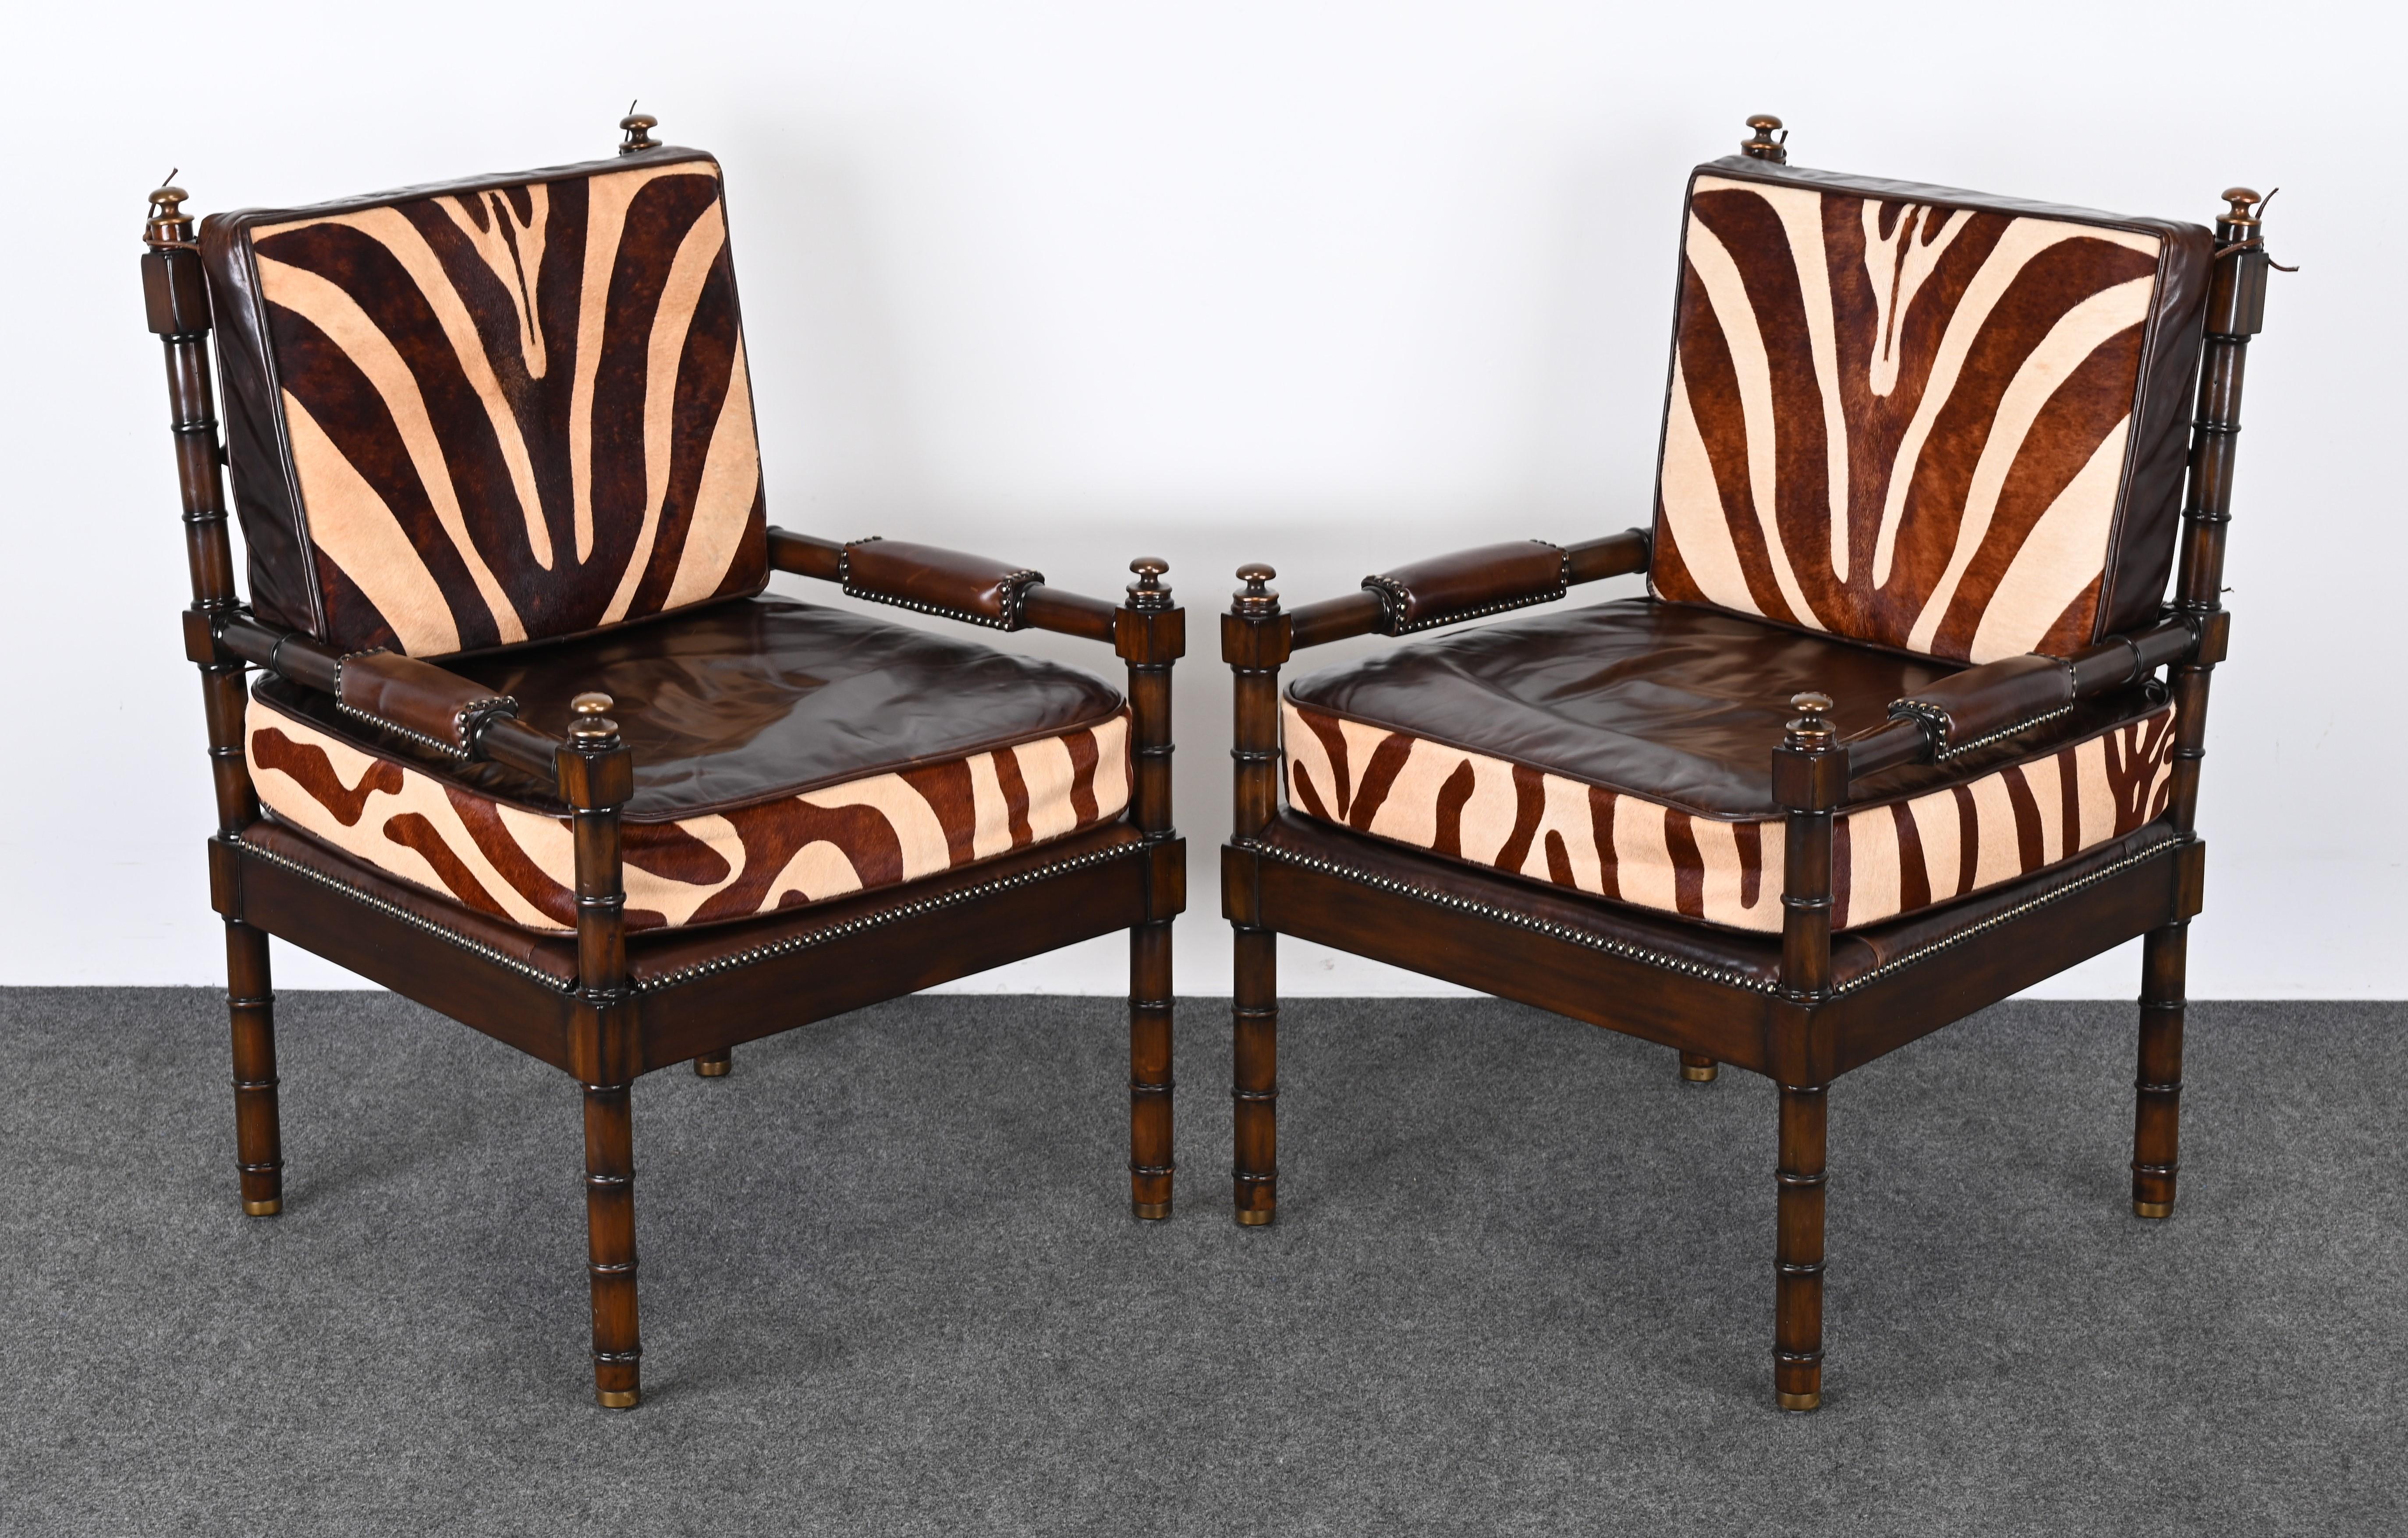 Brass Maitland Smith Bamboo Armchairs with Cowhide Zebra Print Leather Seats, 1990s For Sale